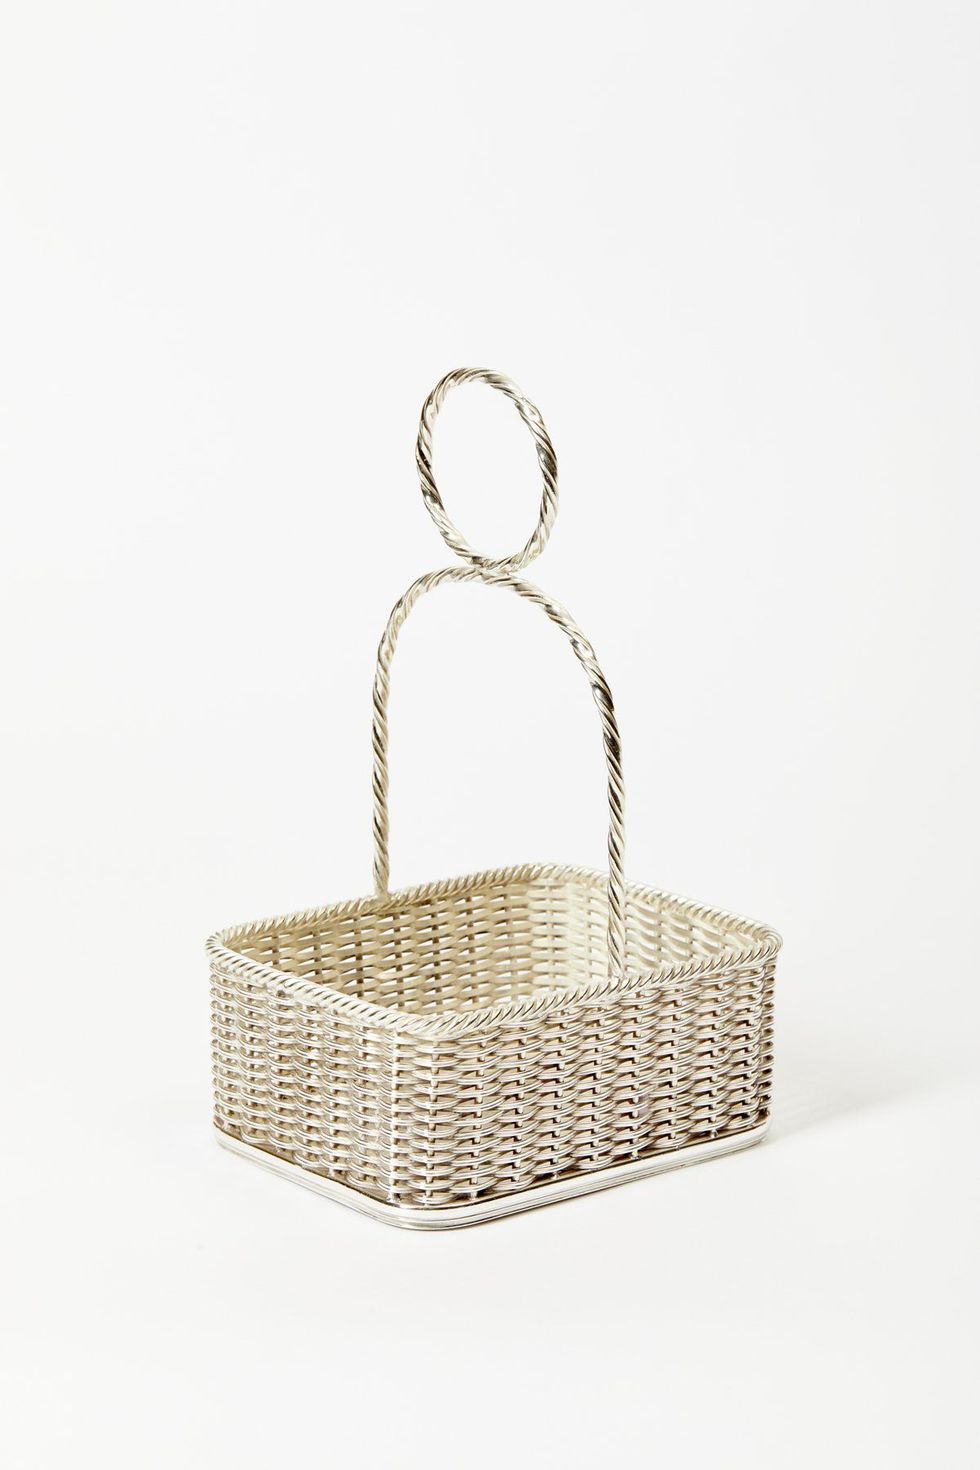 Silver Basket with Handle